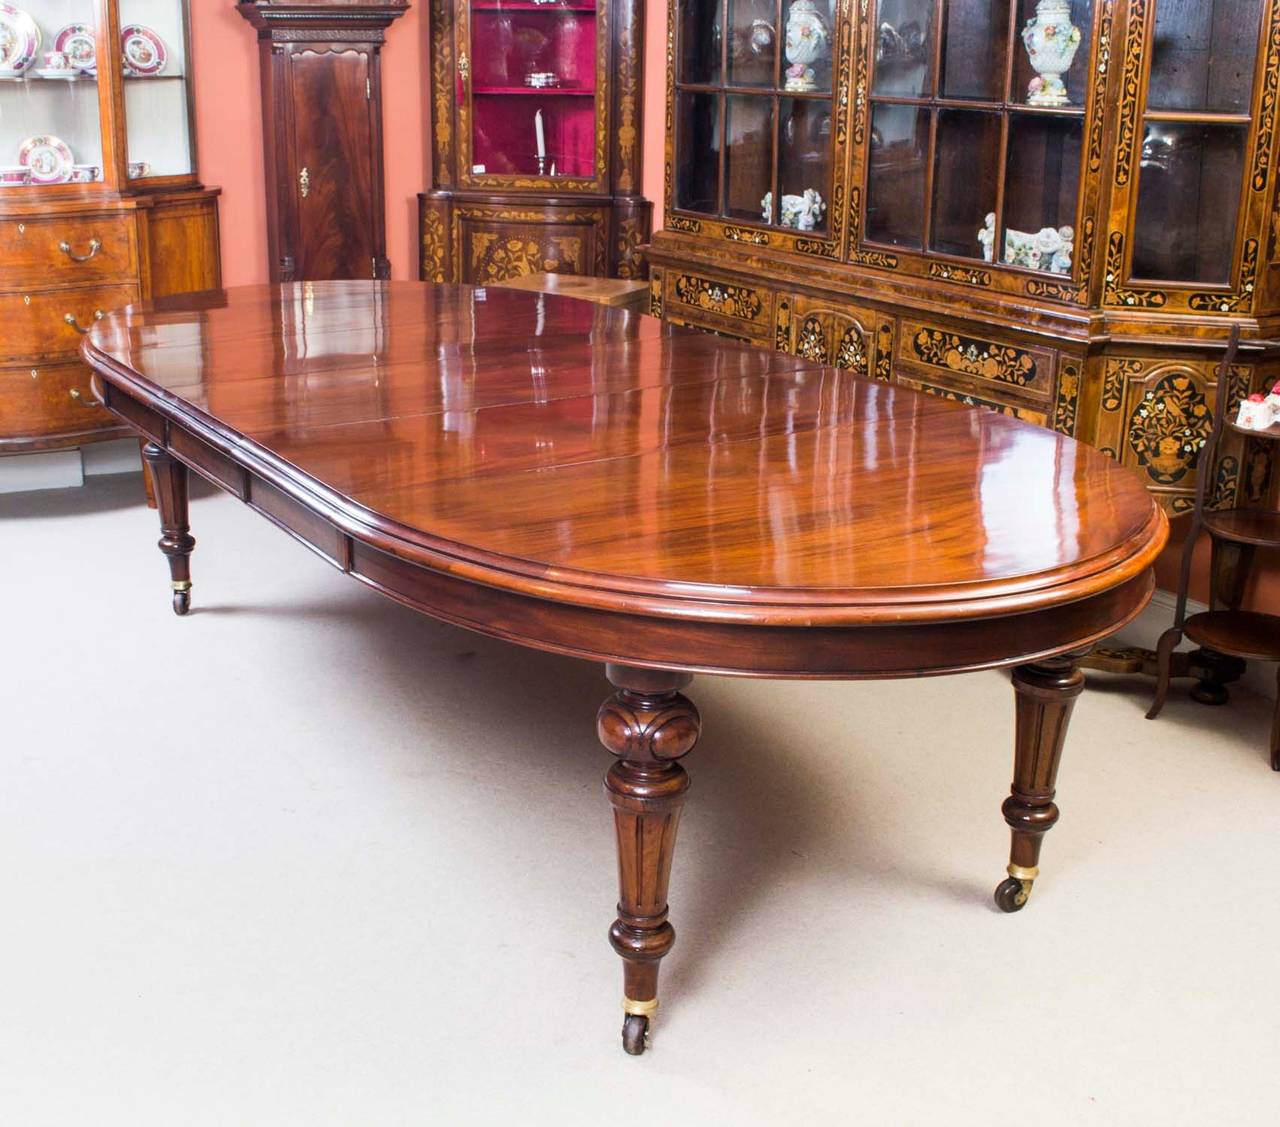 This is a fabulous antique Victorian solid mahogany extending dining table (10ft), circa 1870 in date. 

The table has three original leaves and can comfortably seat ten. It has been hand-crafted from solid mahogany which has a beautiful grain and